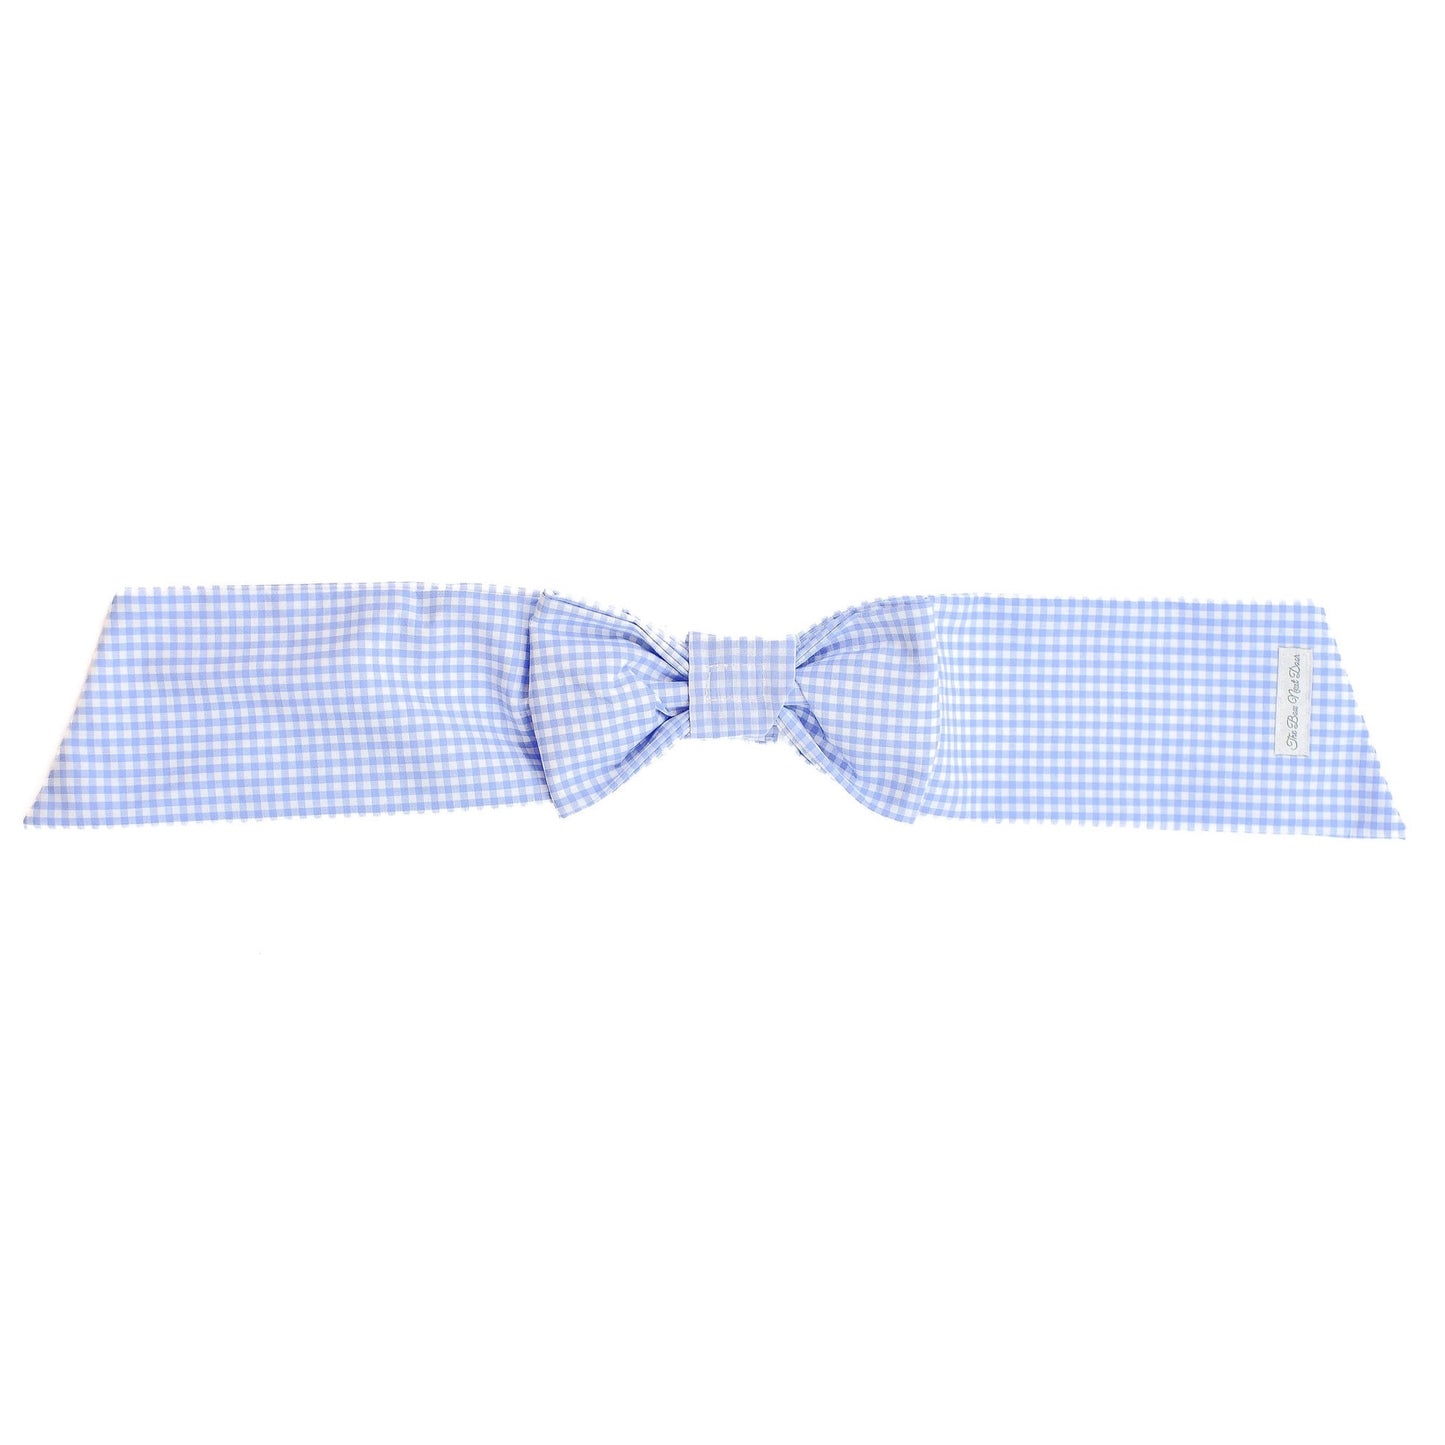 The Bow Next Door Blue Gingham Easter Basket Bow